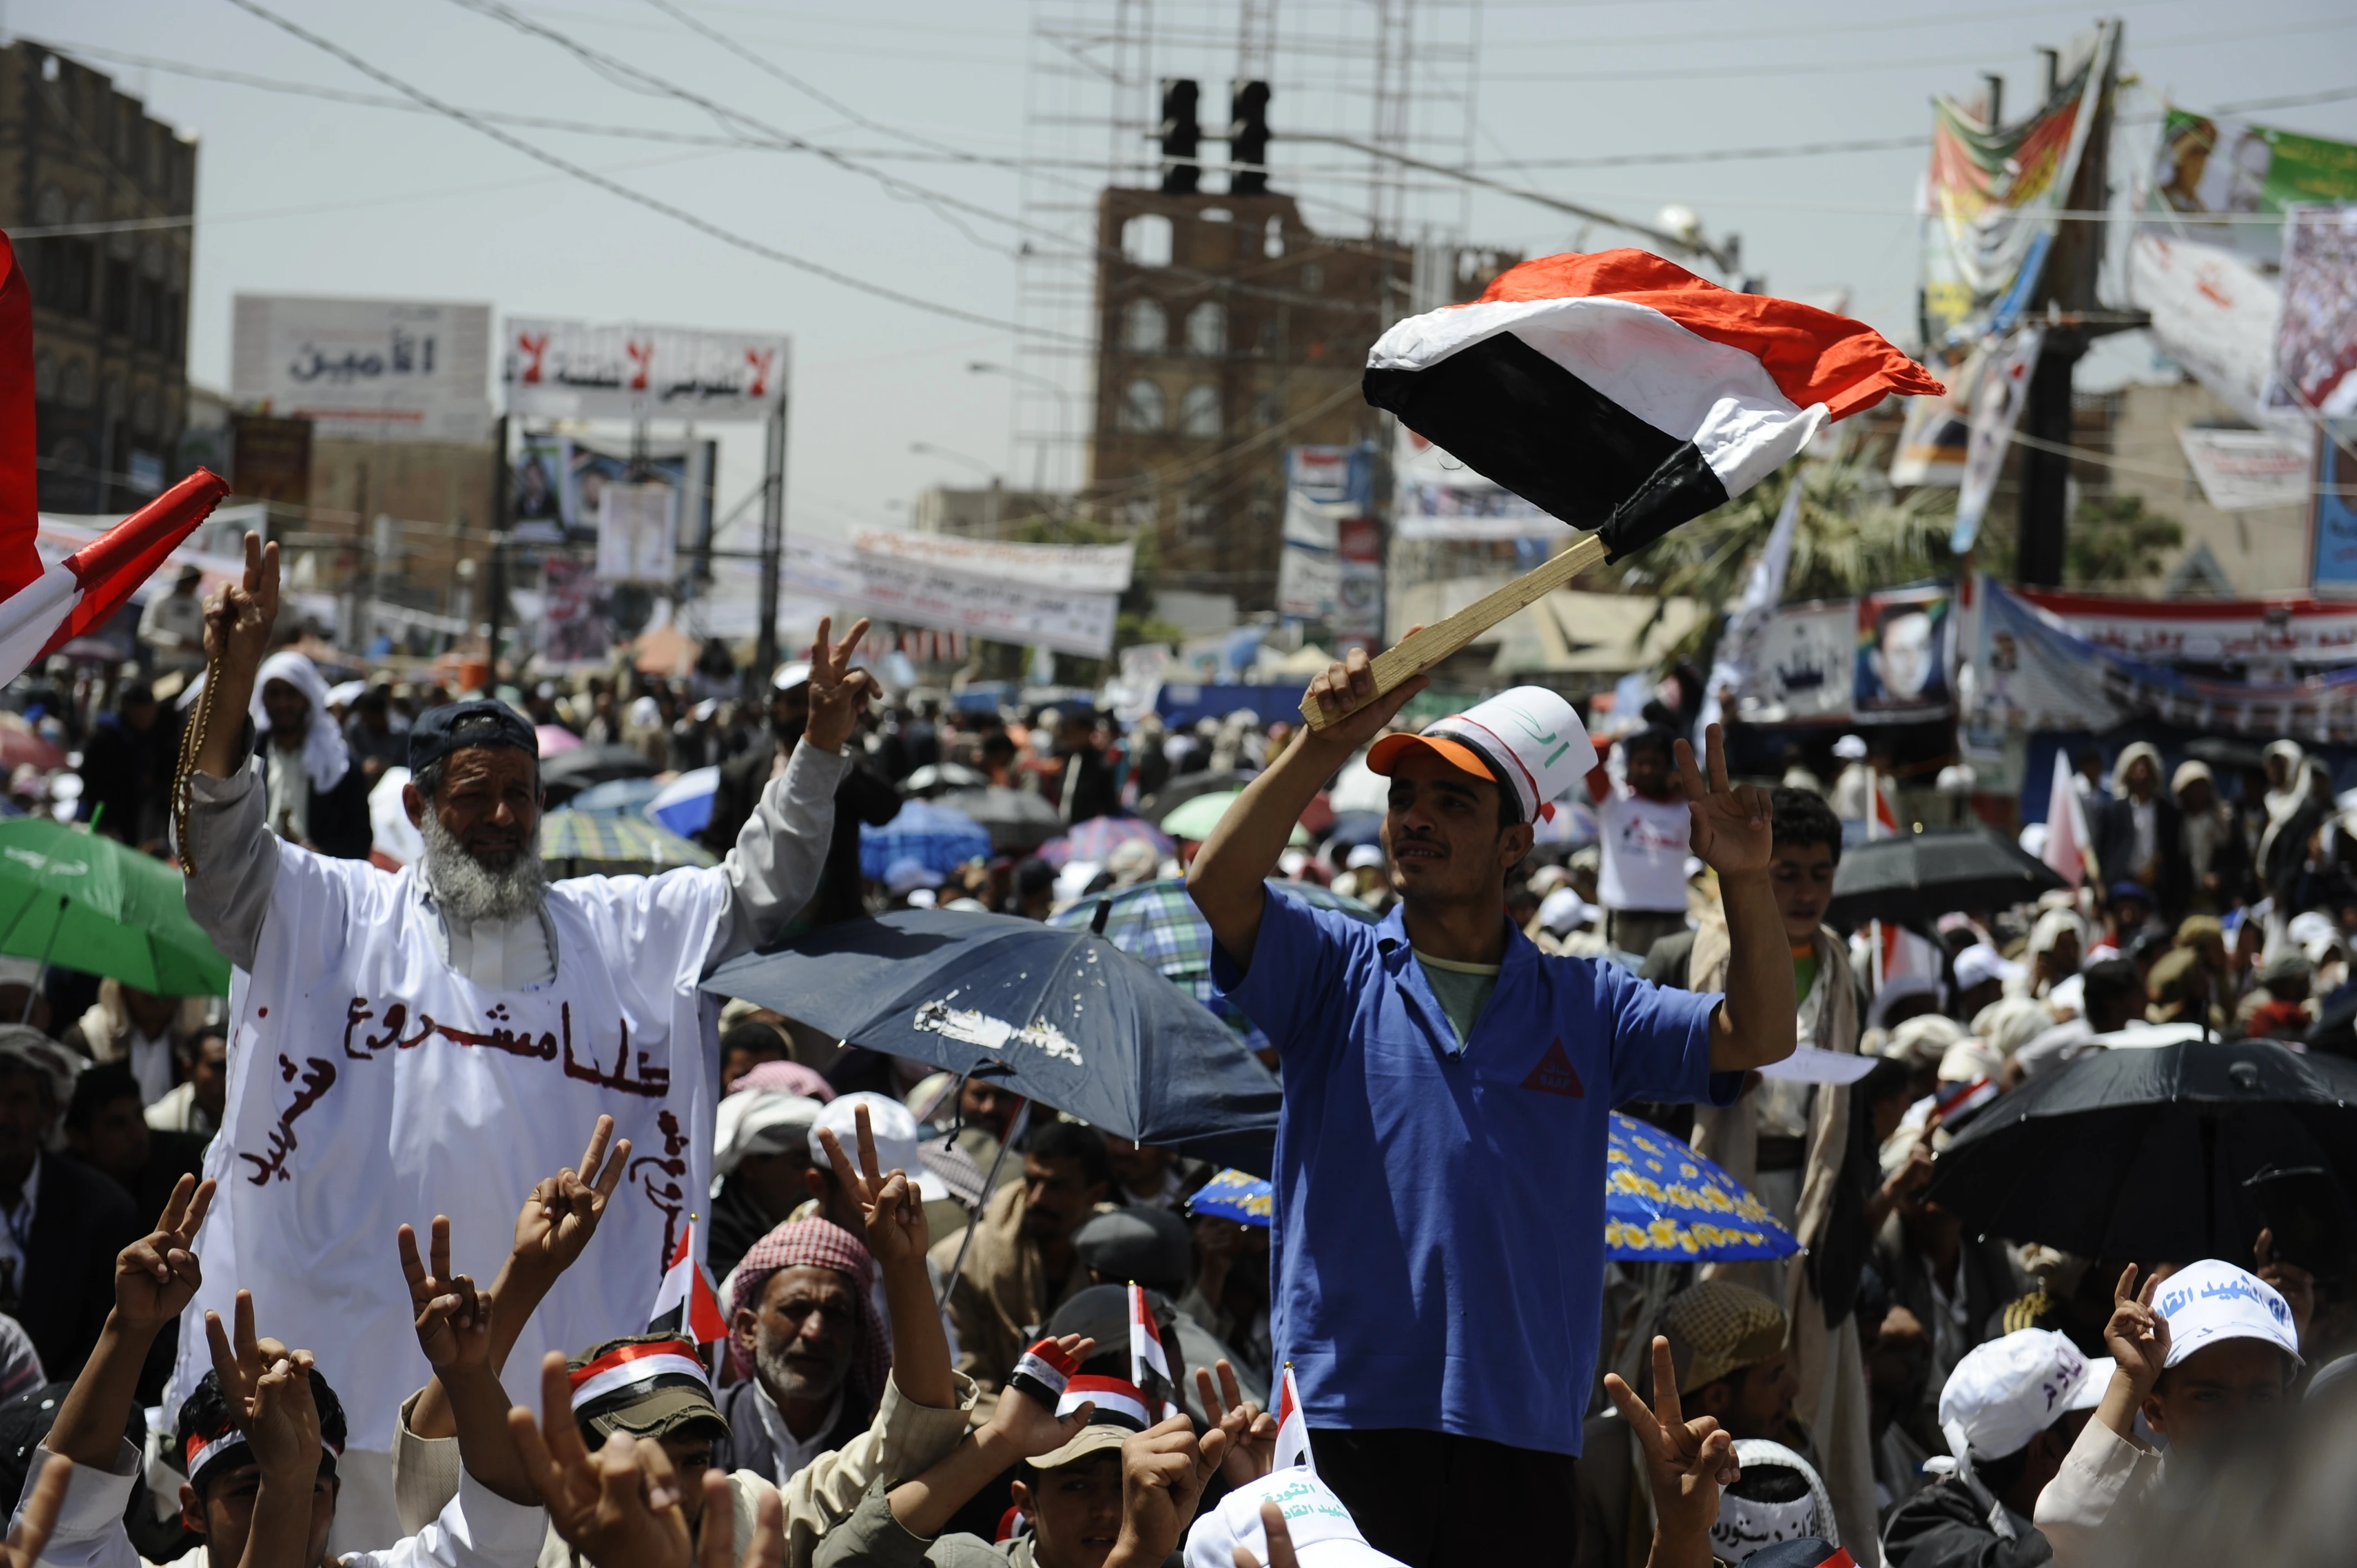 The Arab Spring led to violent and nonviolent demonstrations and protests against the corrupt government in Yemen. Crowded streets in Sanaa, the capital of Yemen